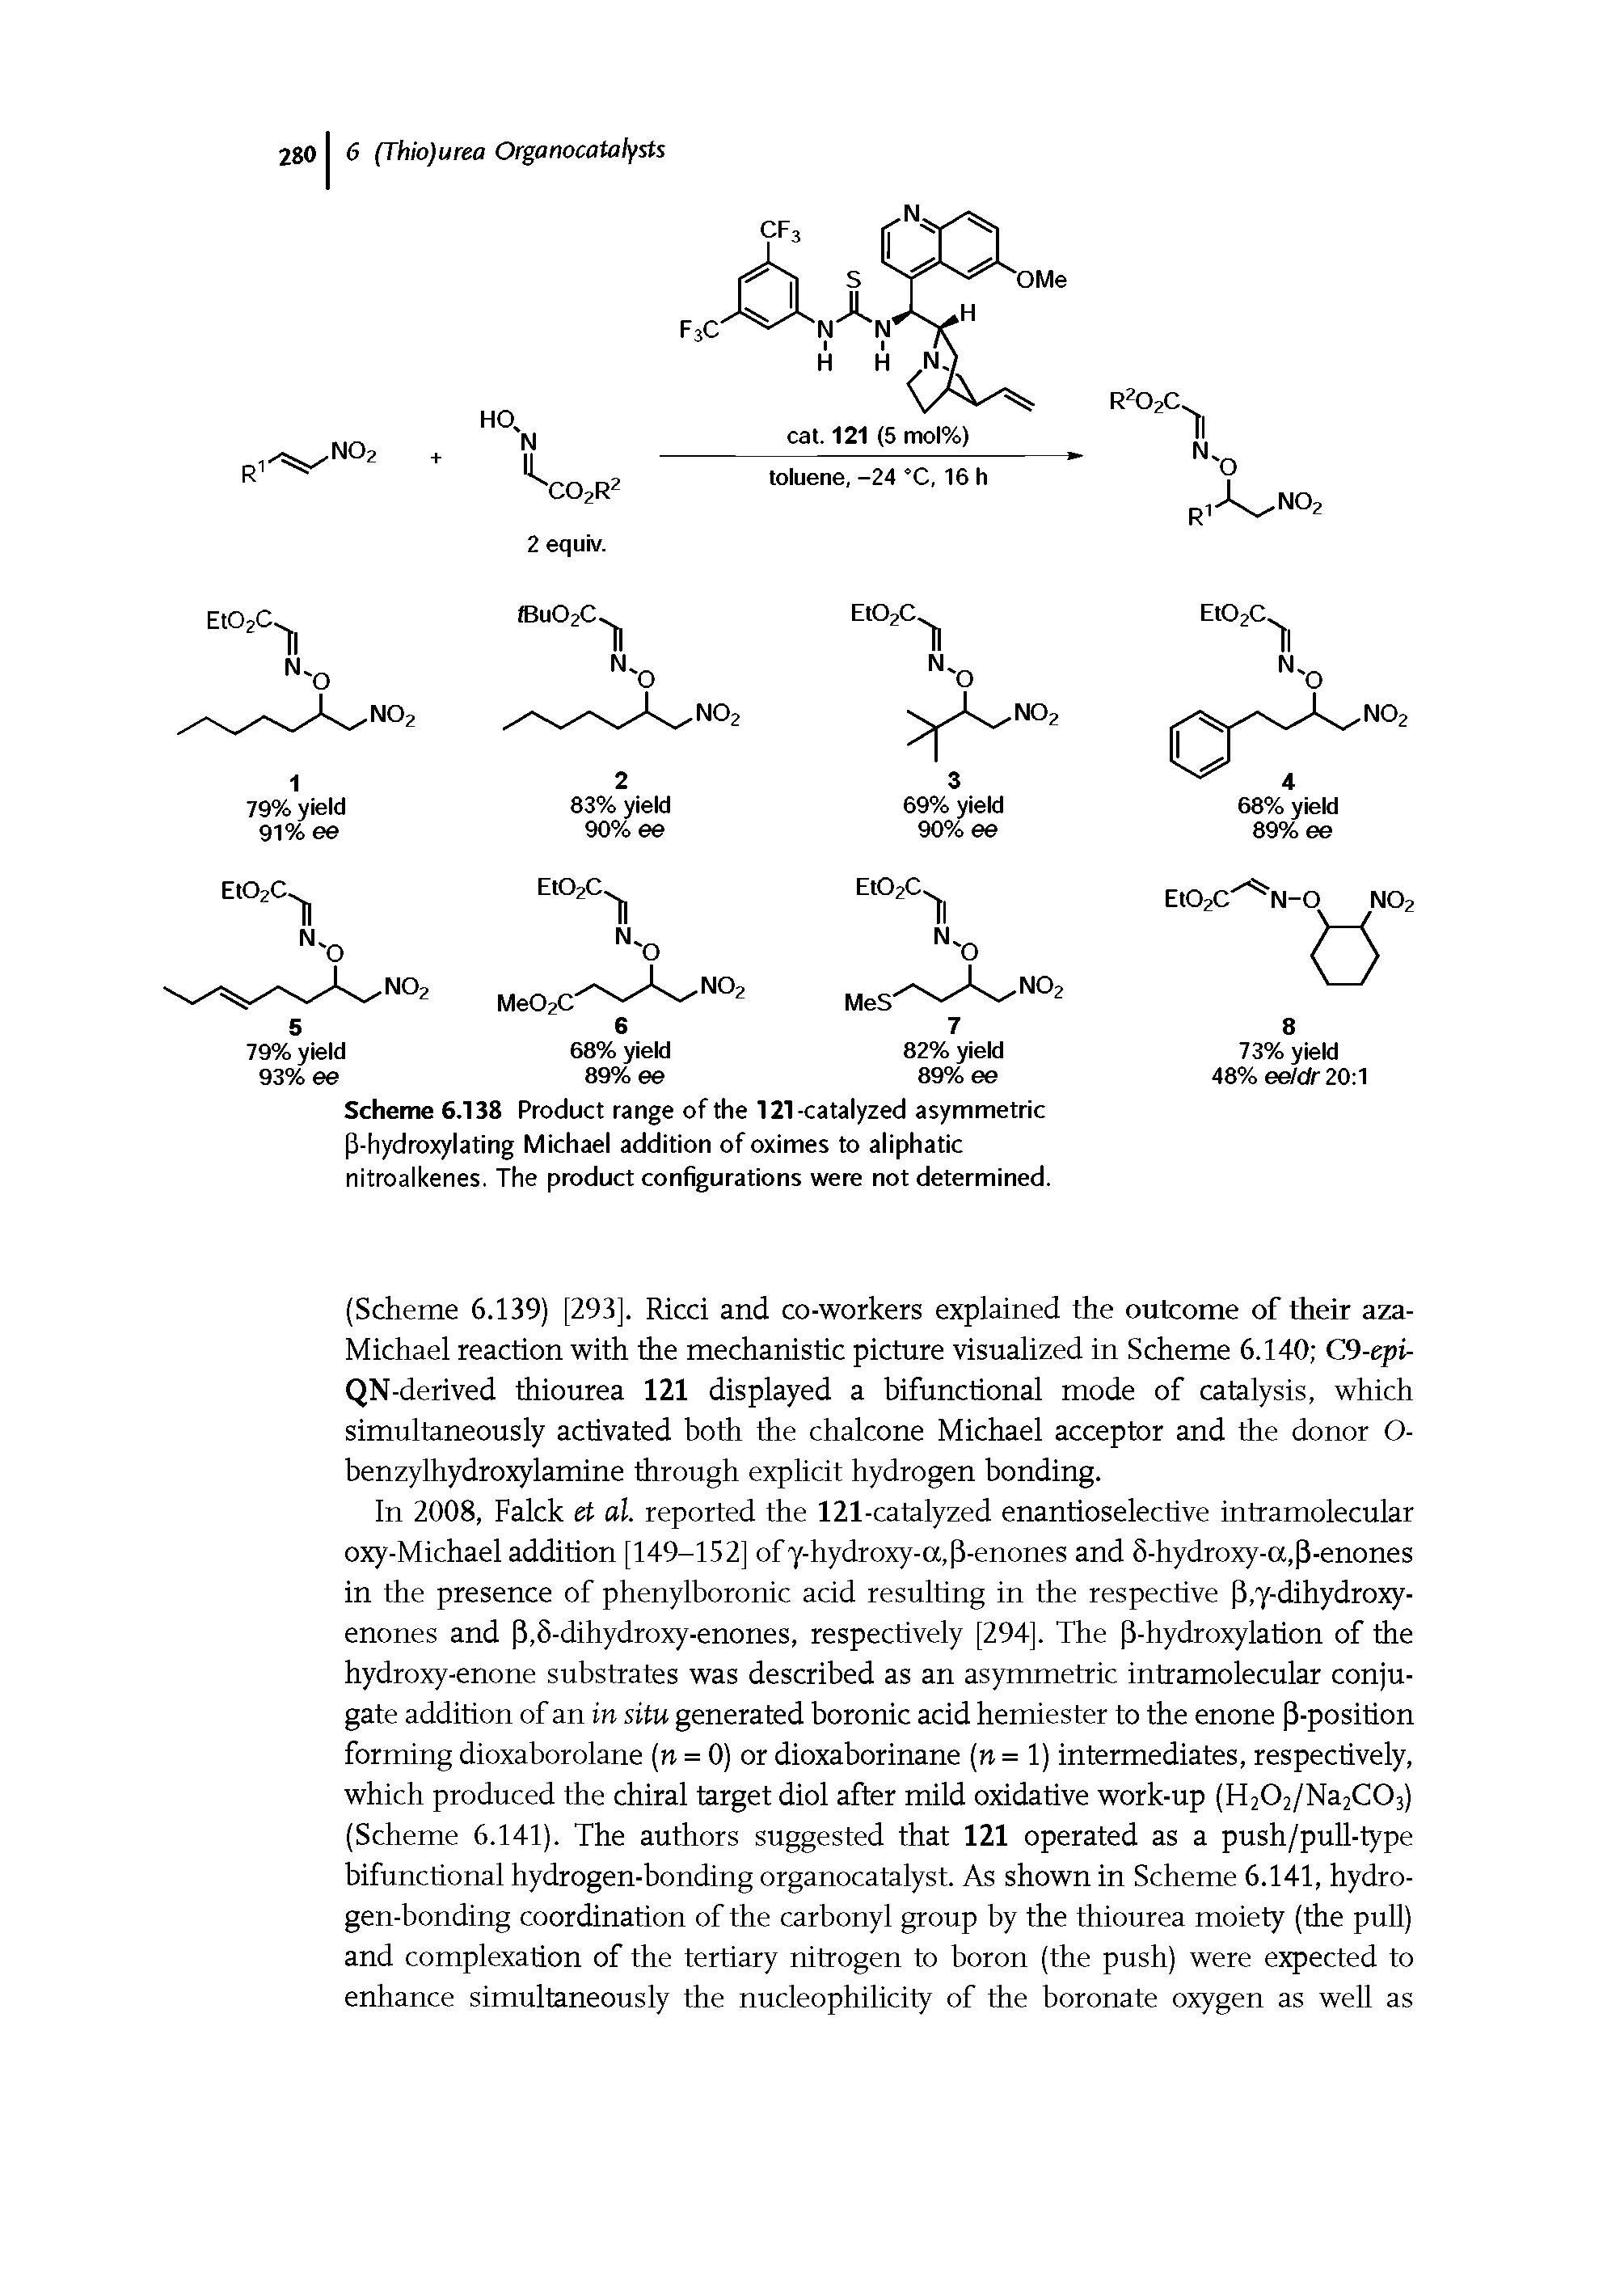 Scheme 6.138 Product range of the 121-catalyzed asymmetric (3-hydroxylating Michael addition of oximes to aliphatic nitroalkenes. The product configurations were not determined.